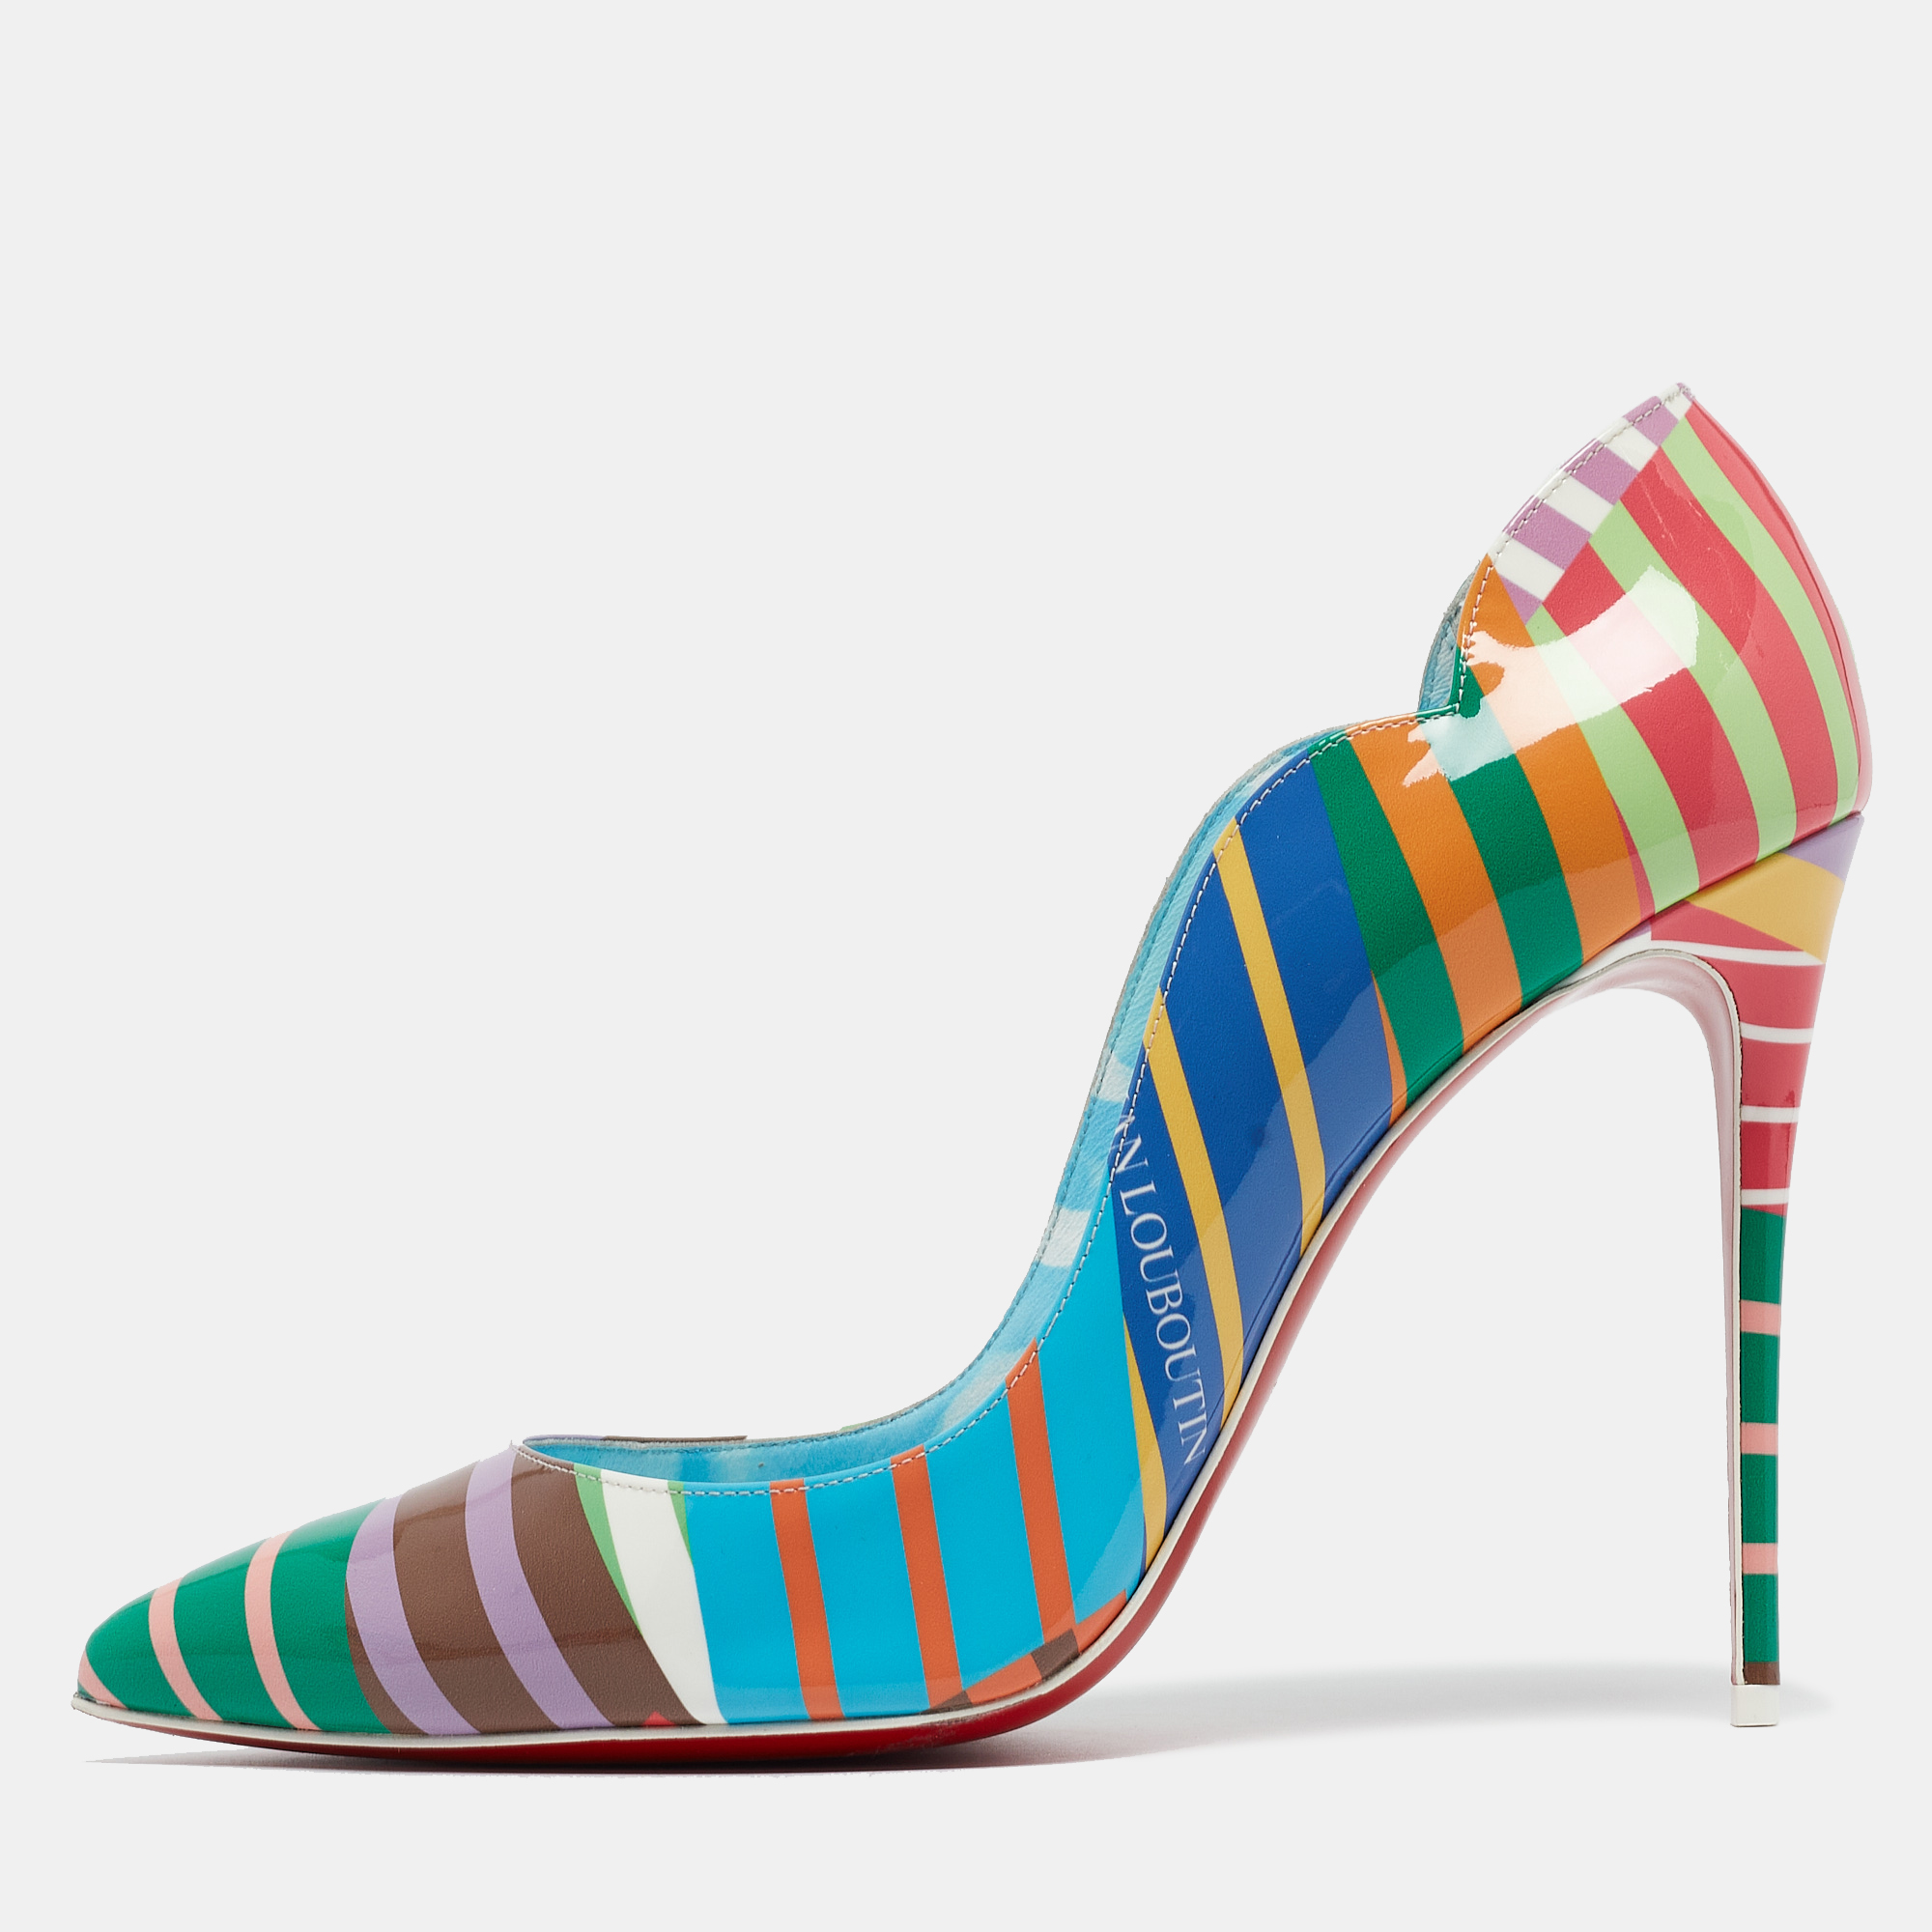 Christian louboutin multicolor printed patent leather hot chick pumps size 42